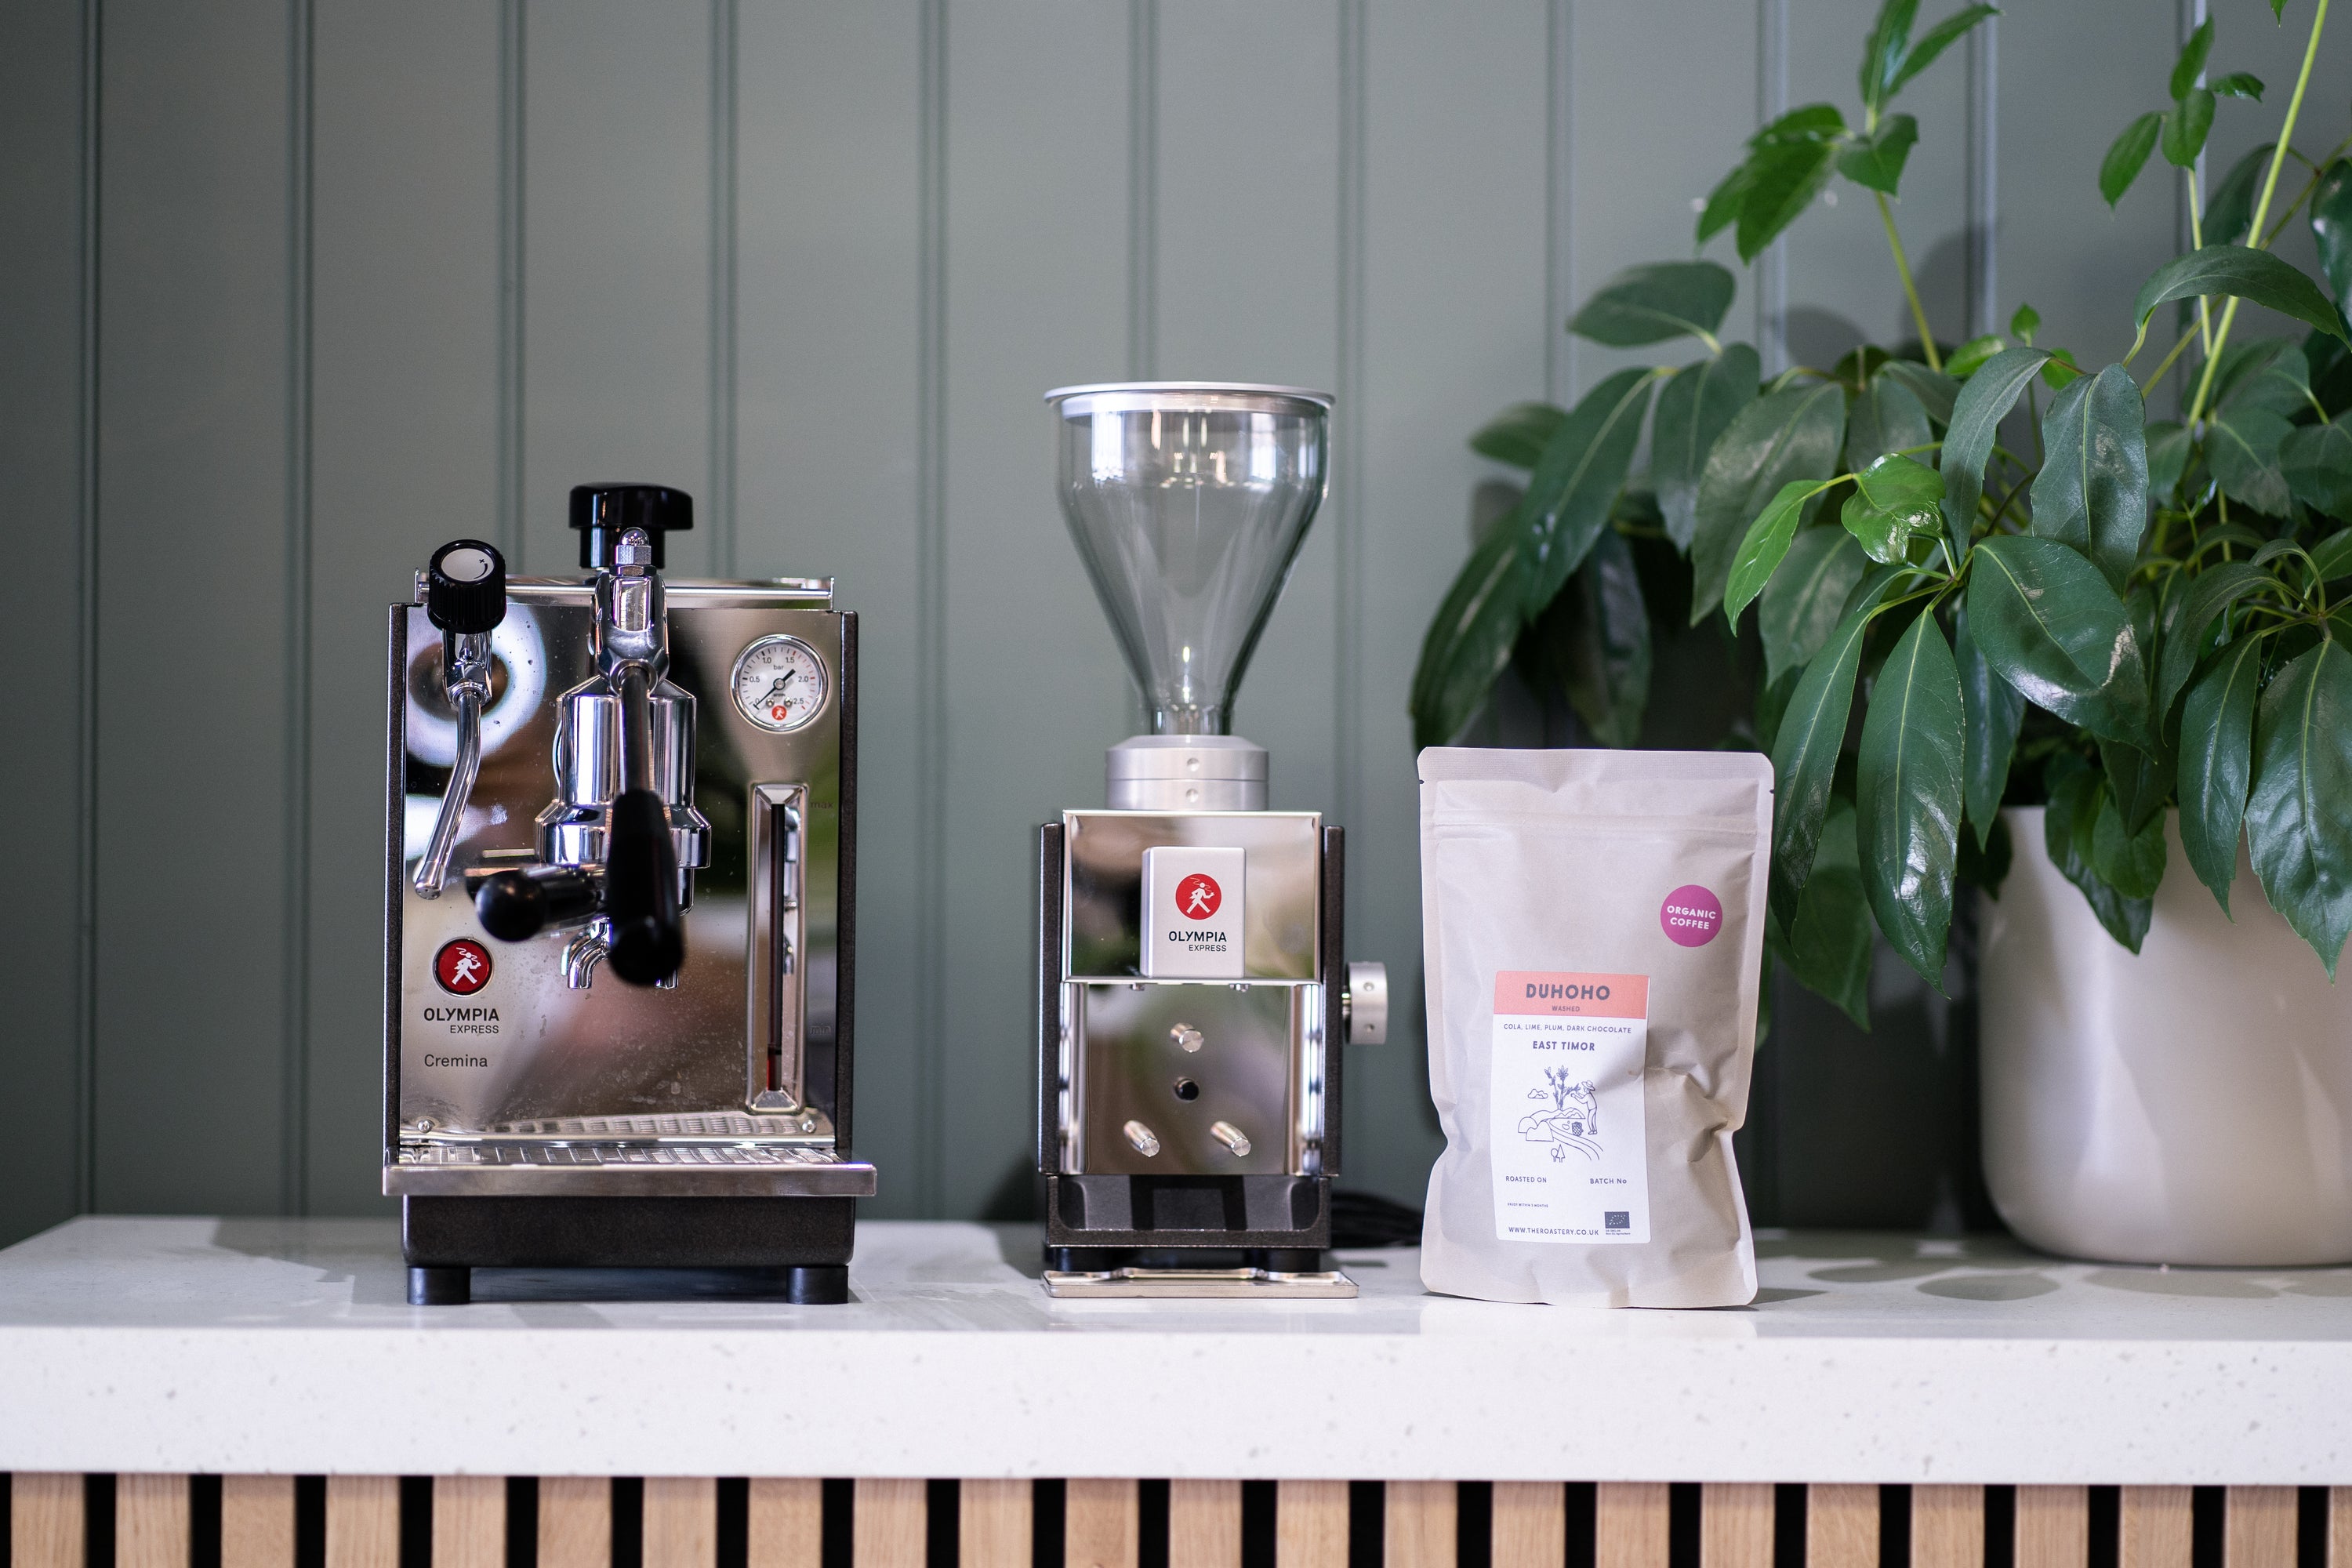 Becoming the UK’s main stockists for Olympia Express Espresso Machines